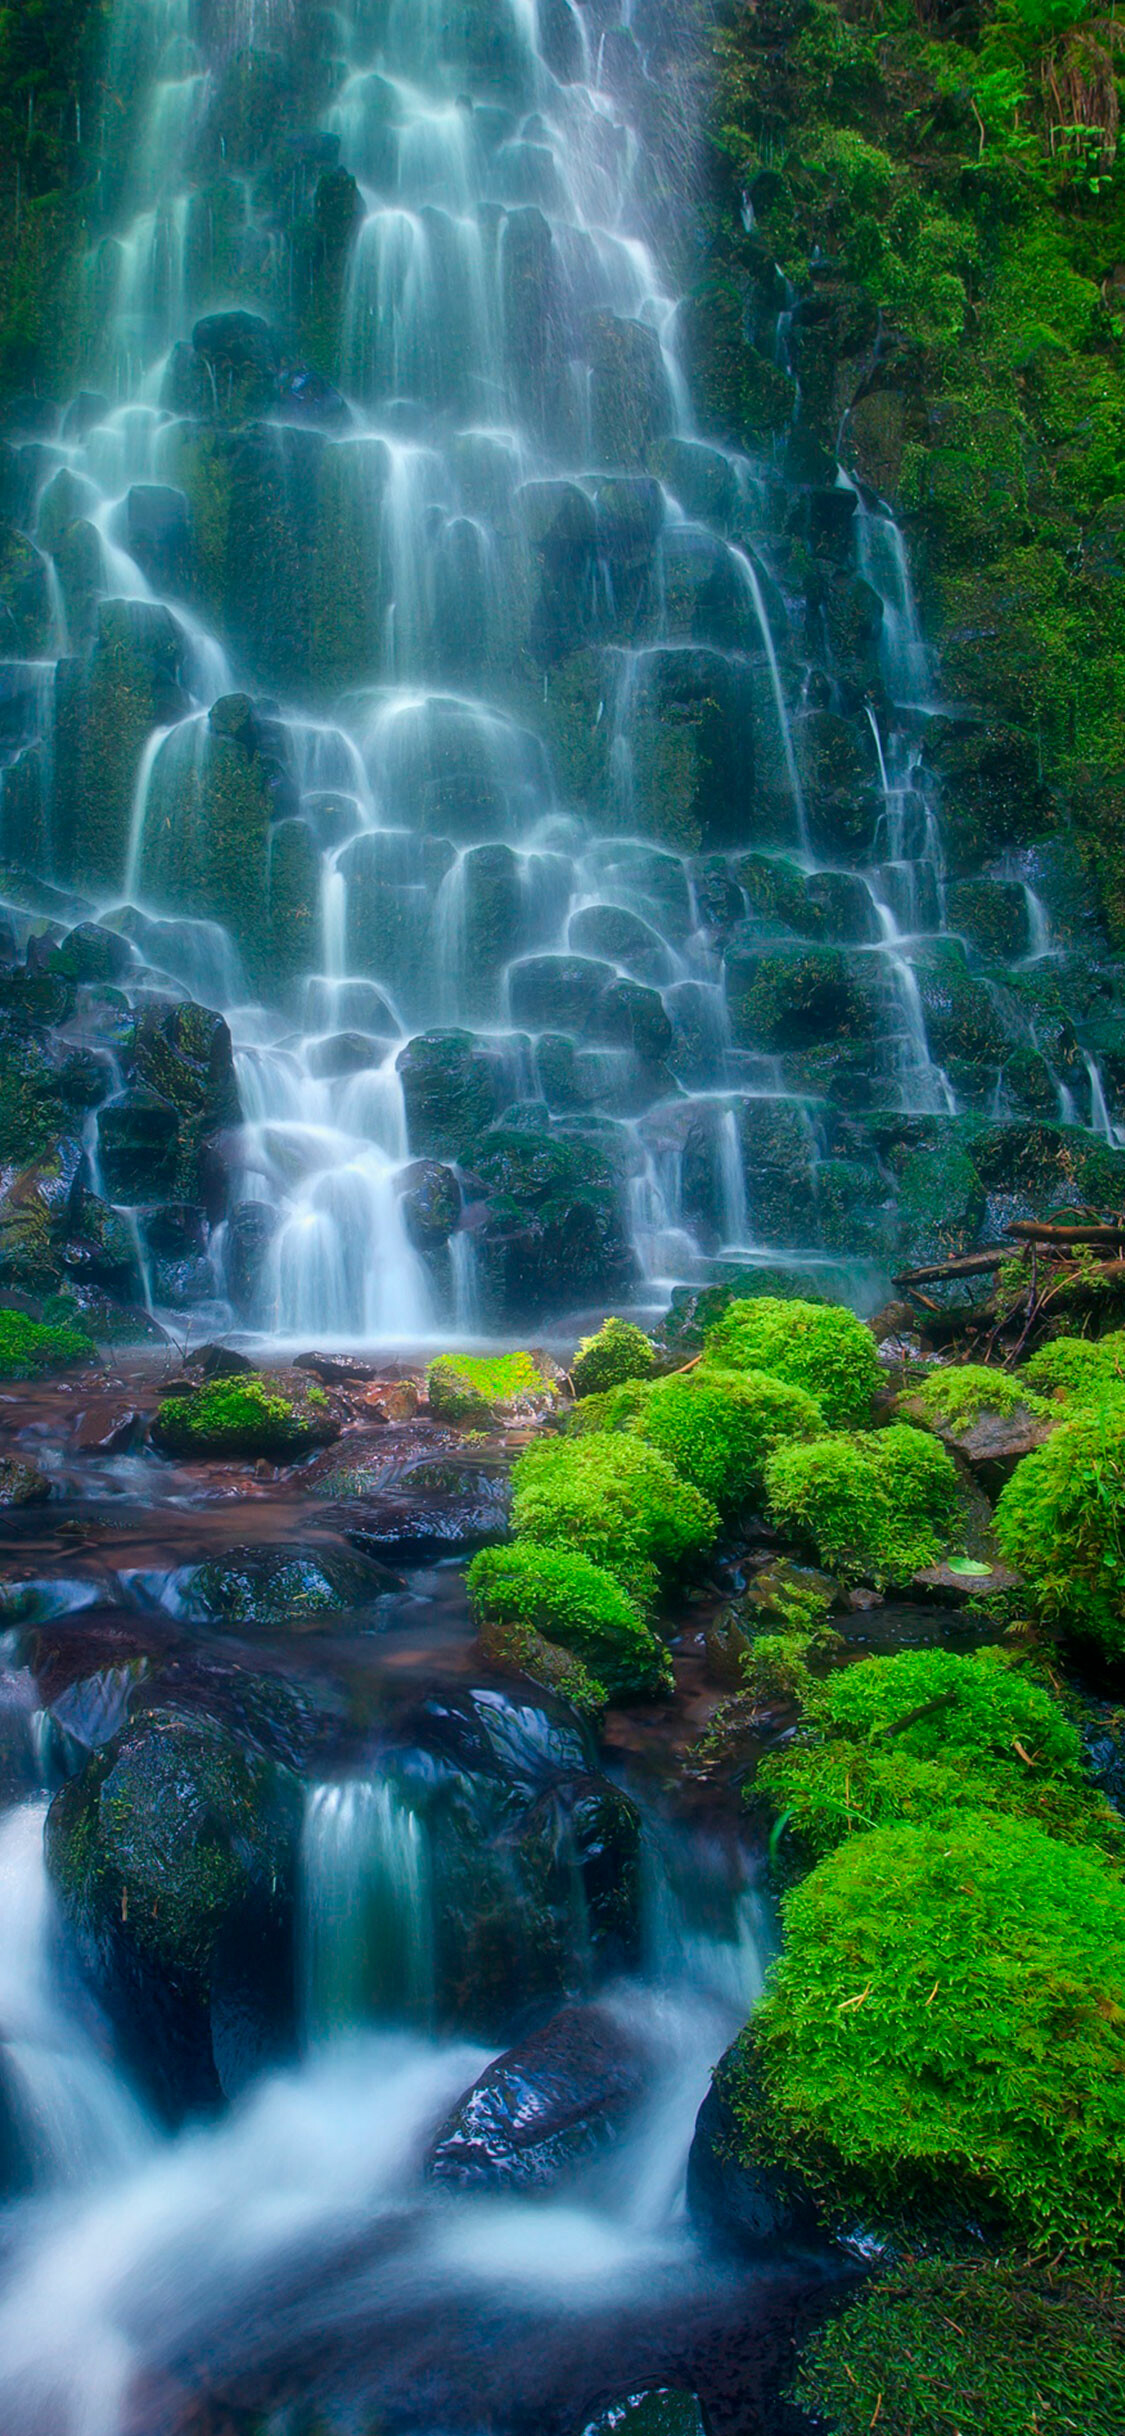 Waterfall: Forms when a stream flows from the edge of a cliff and drops freely to the base. 1130x2440 HD Wallpaper.